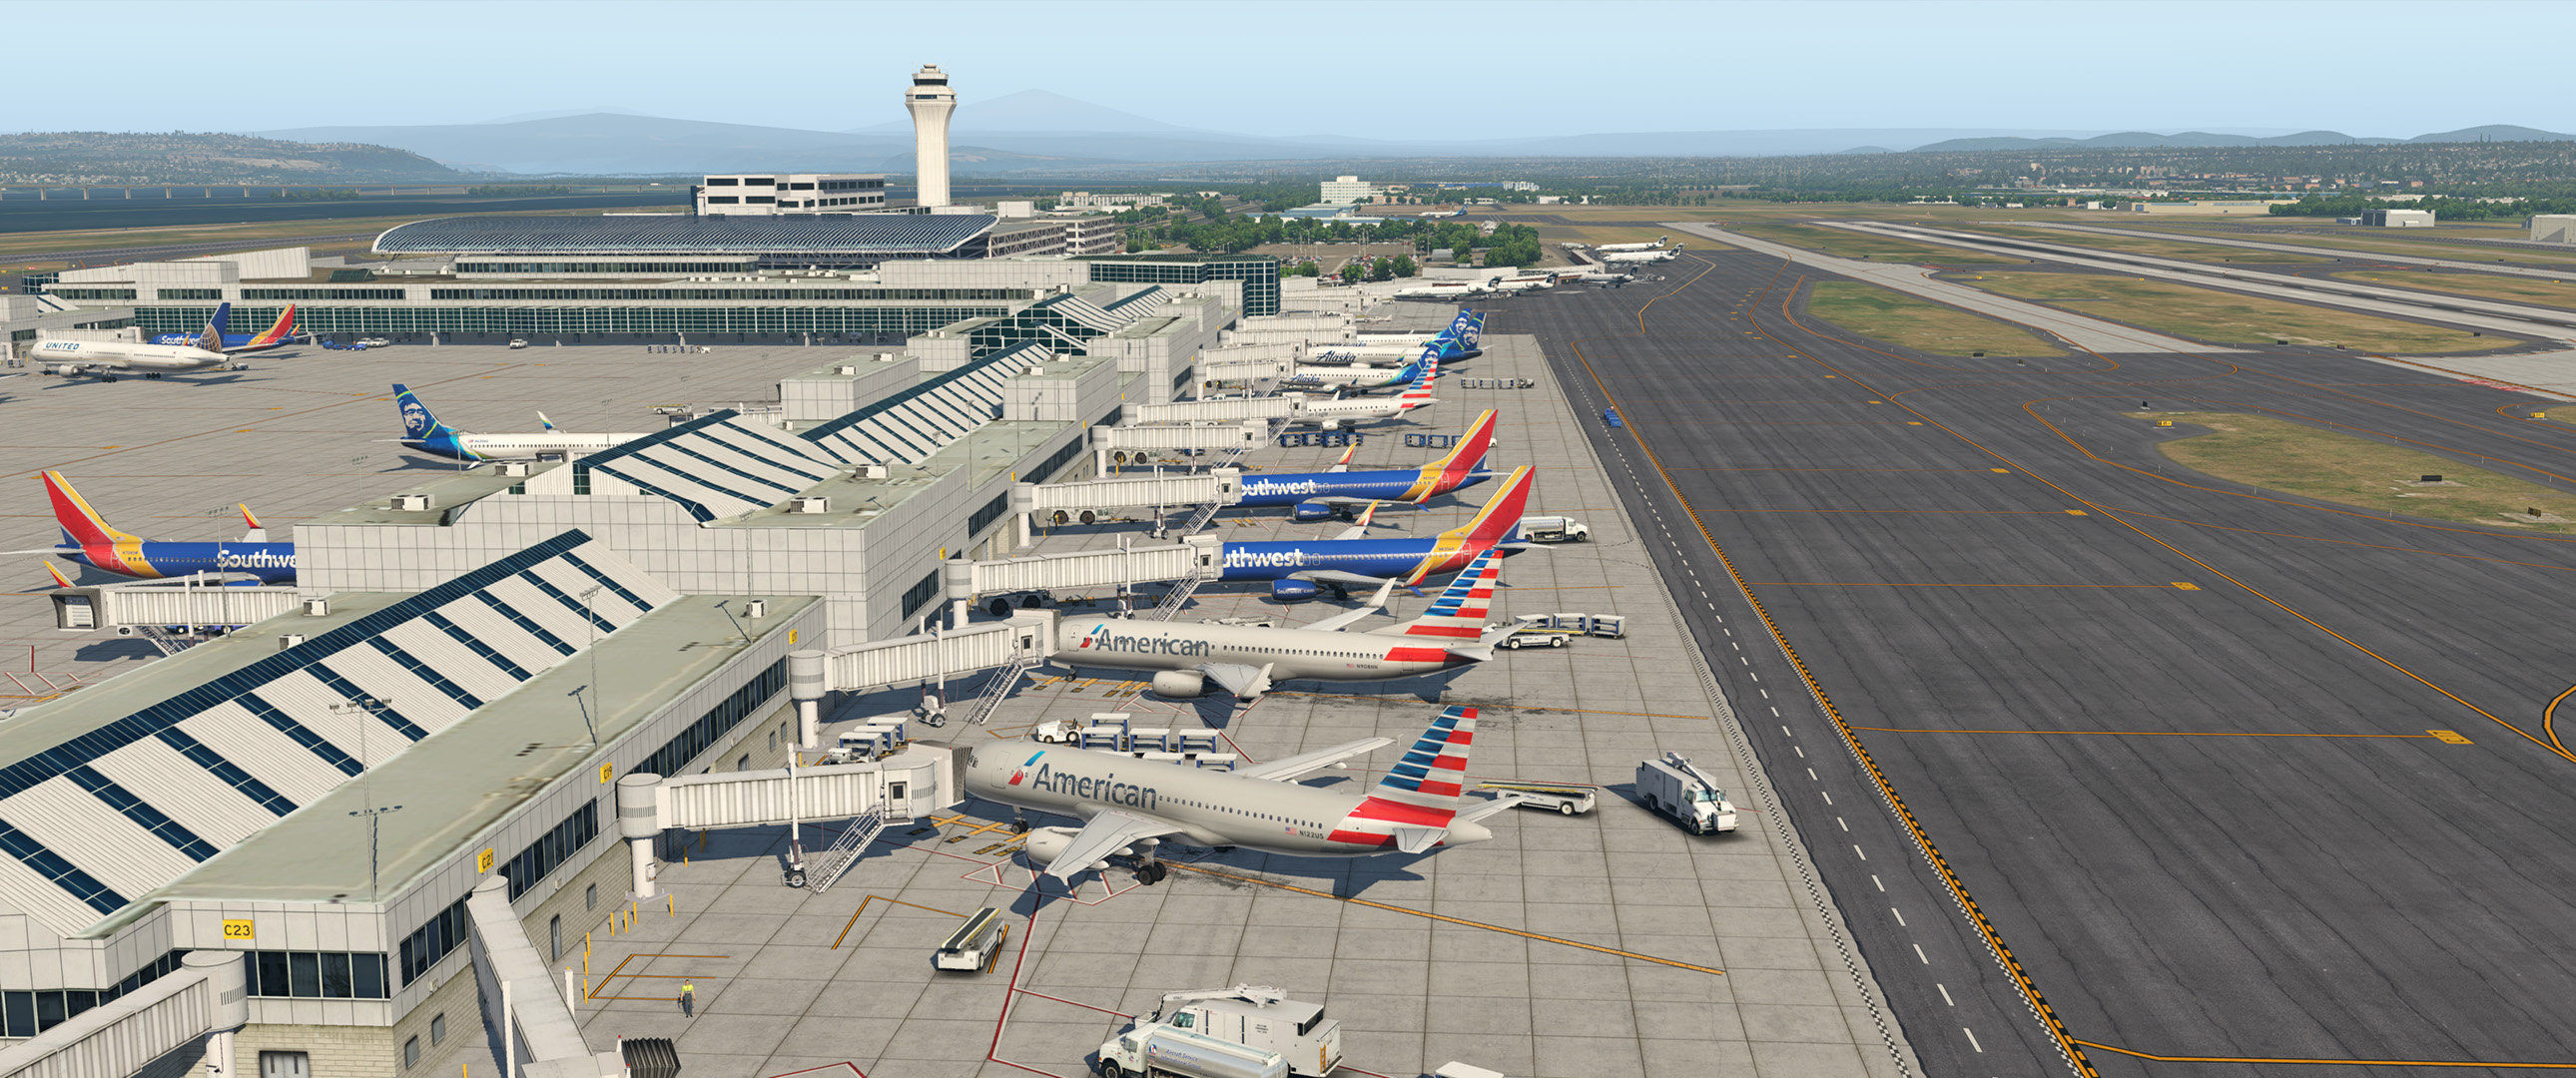 Best Freeware Sceneries for X-Plane 11 image 97